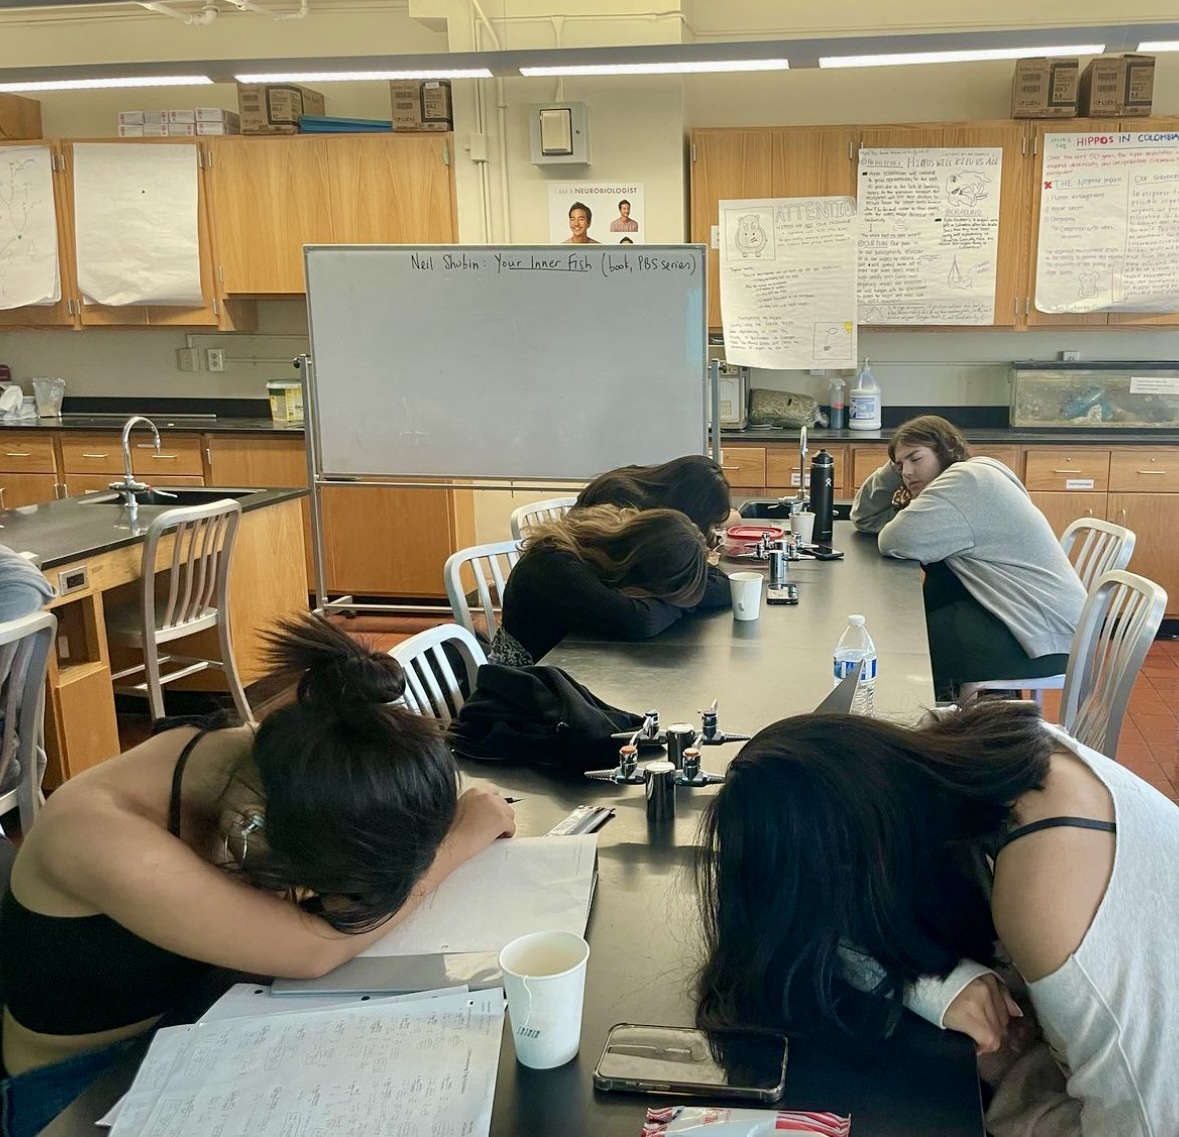 The Bronx Science Mental Health Association, a club formed in response to the academic pressures of school, aims to improve students well-being by developing coping strategies. They often spends their meetings meditating, as seen here. (Photo Credit: Bronx Science MHA Instagram; used by permission)